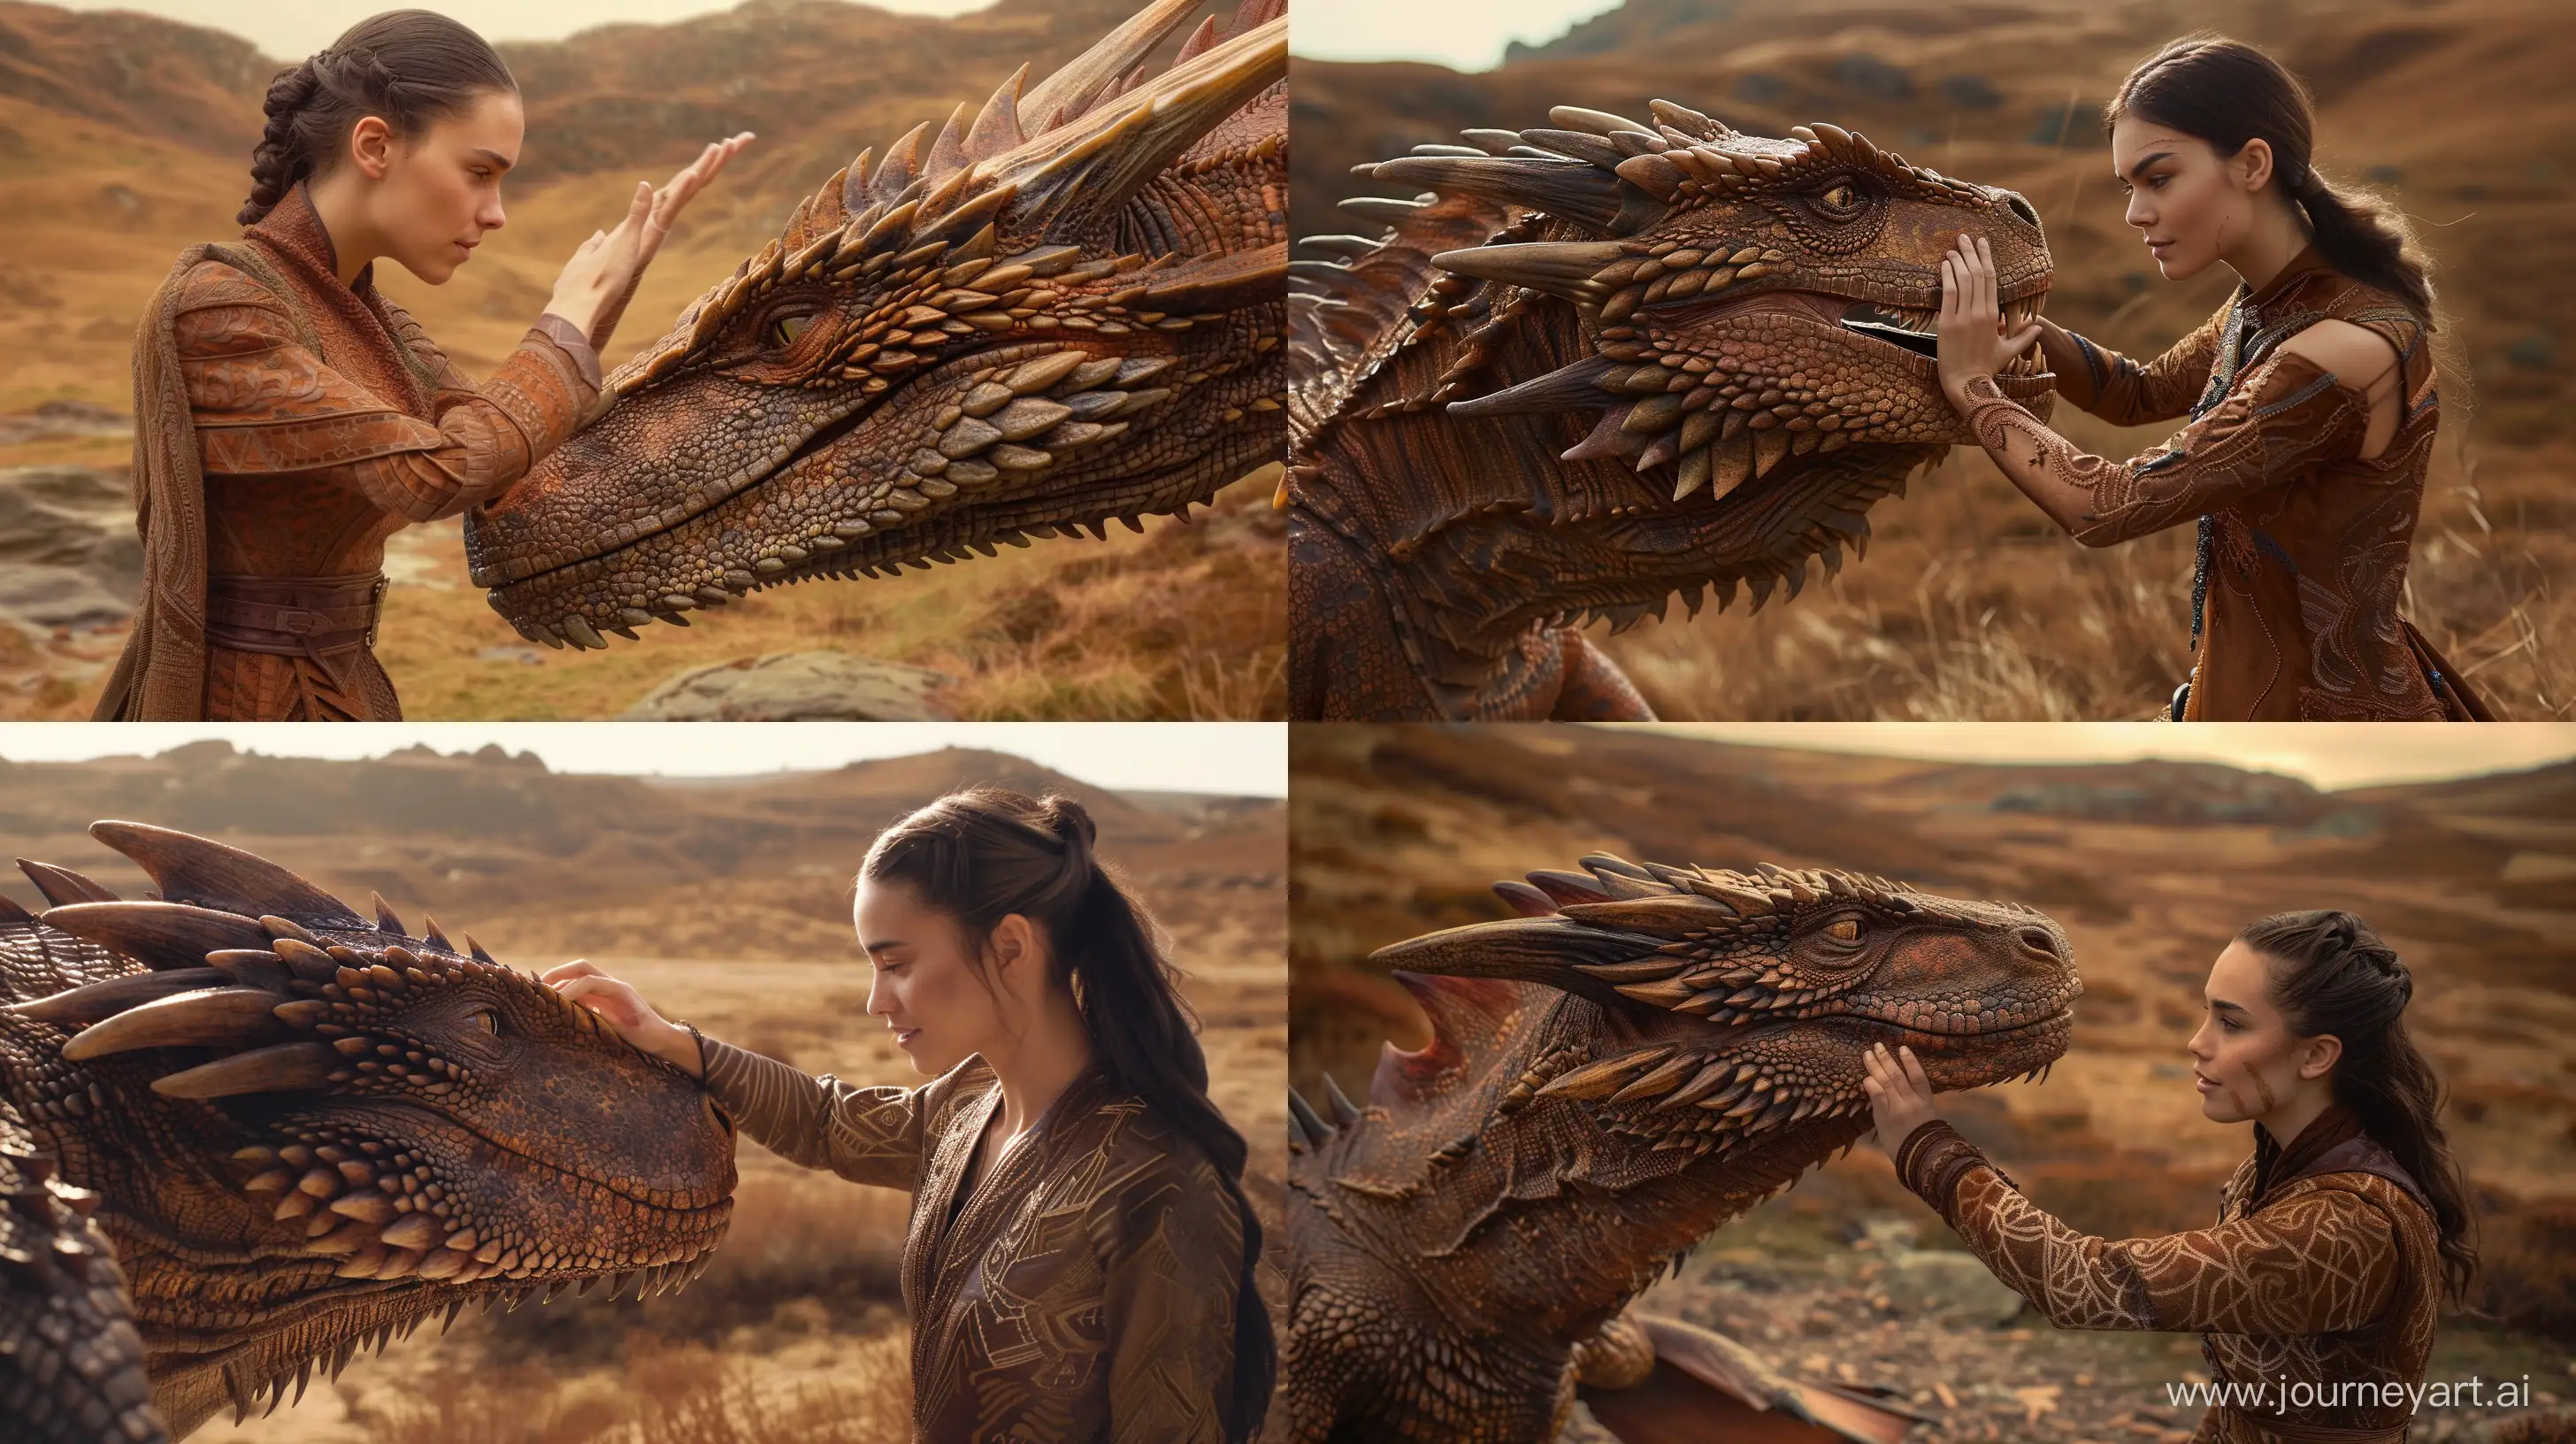 Young-Woman-in-Brown-Clothing-Petting-Hyperrealistic-Dragon-in-Scenic-Brown-Hills